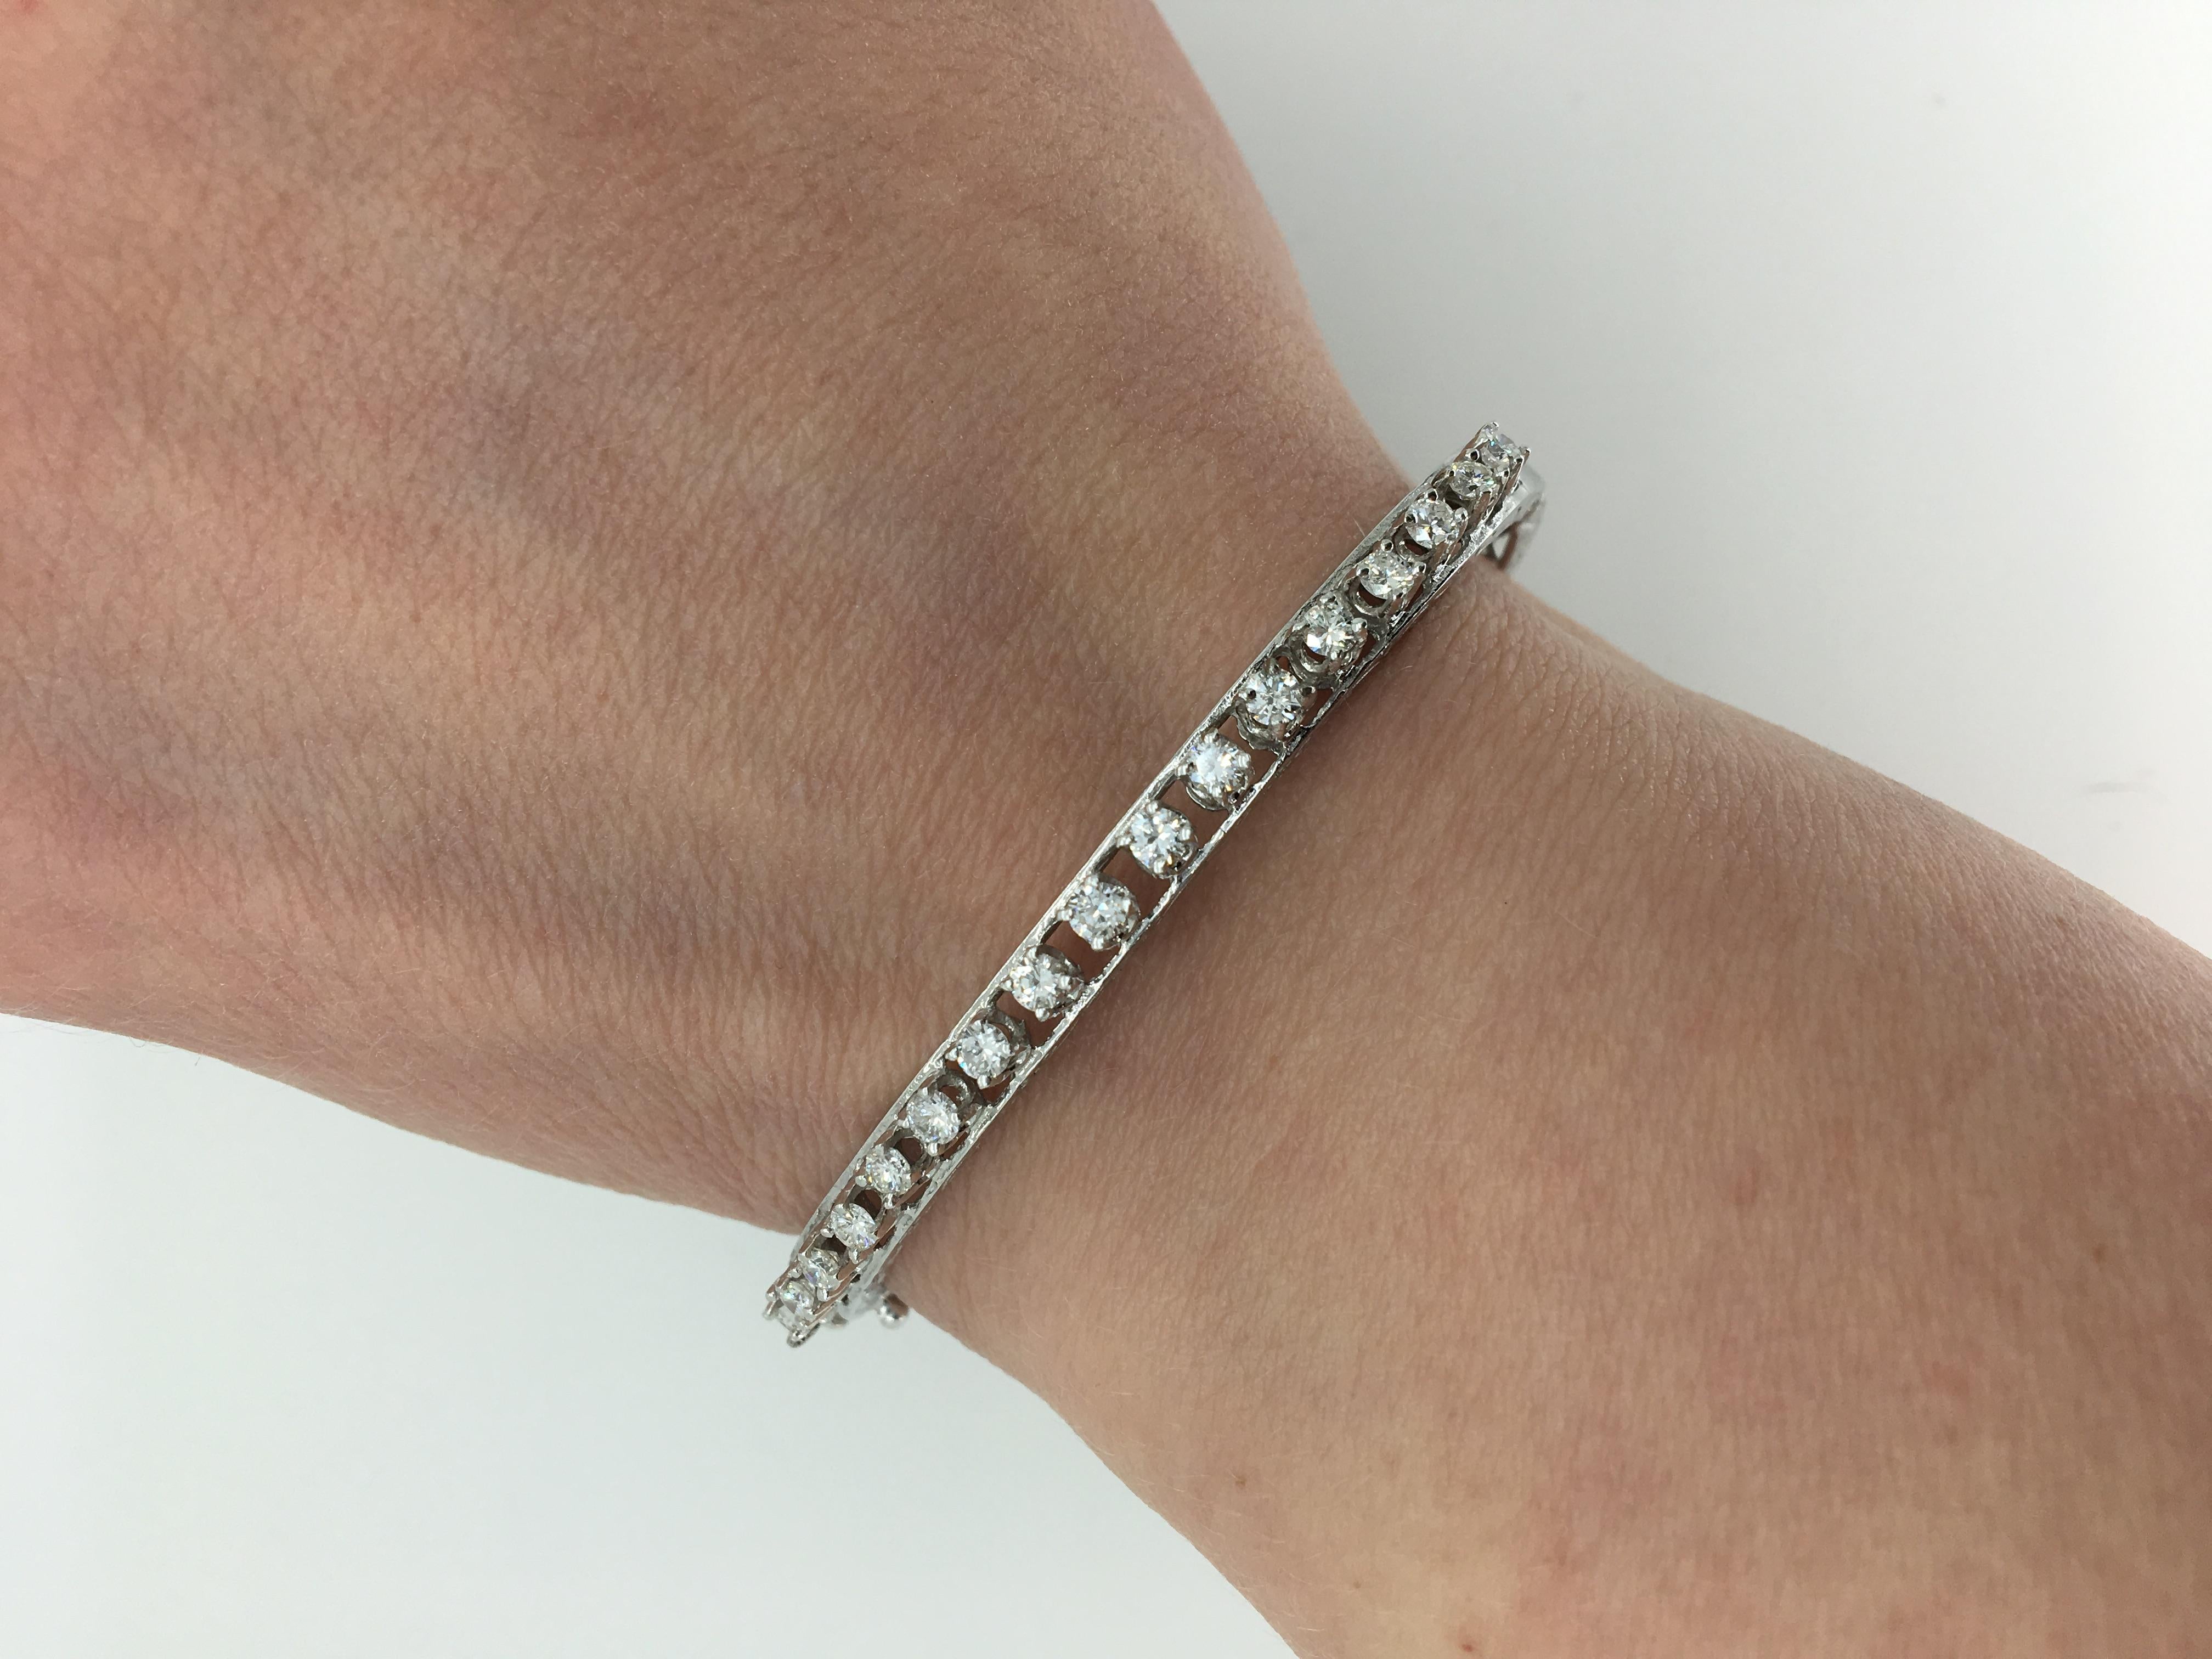 This bangle style bracelet features 17 Round Brilliant Cut Diamonds displaying an average color of F-H and an average clarity of VS1-SI1. There is approximately 1.10CTW prong set along the 14K white gold bracelet. This handcrafted bangle is